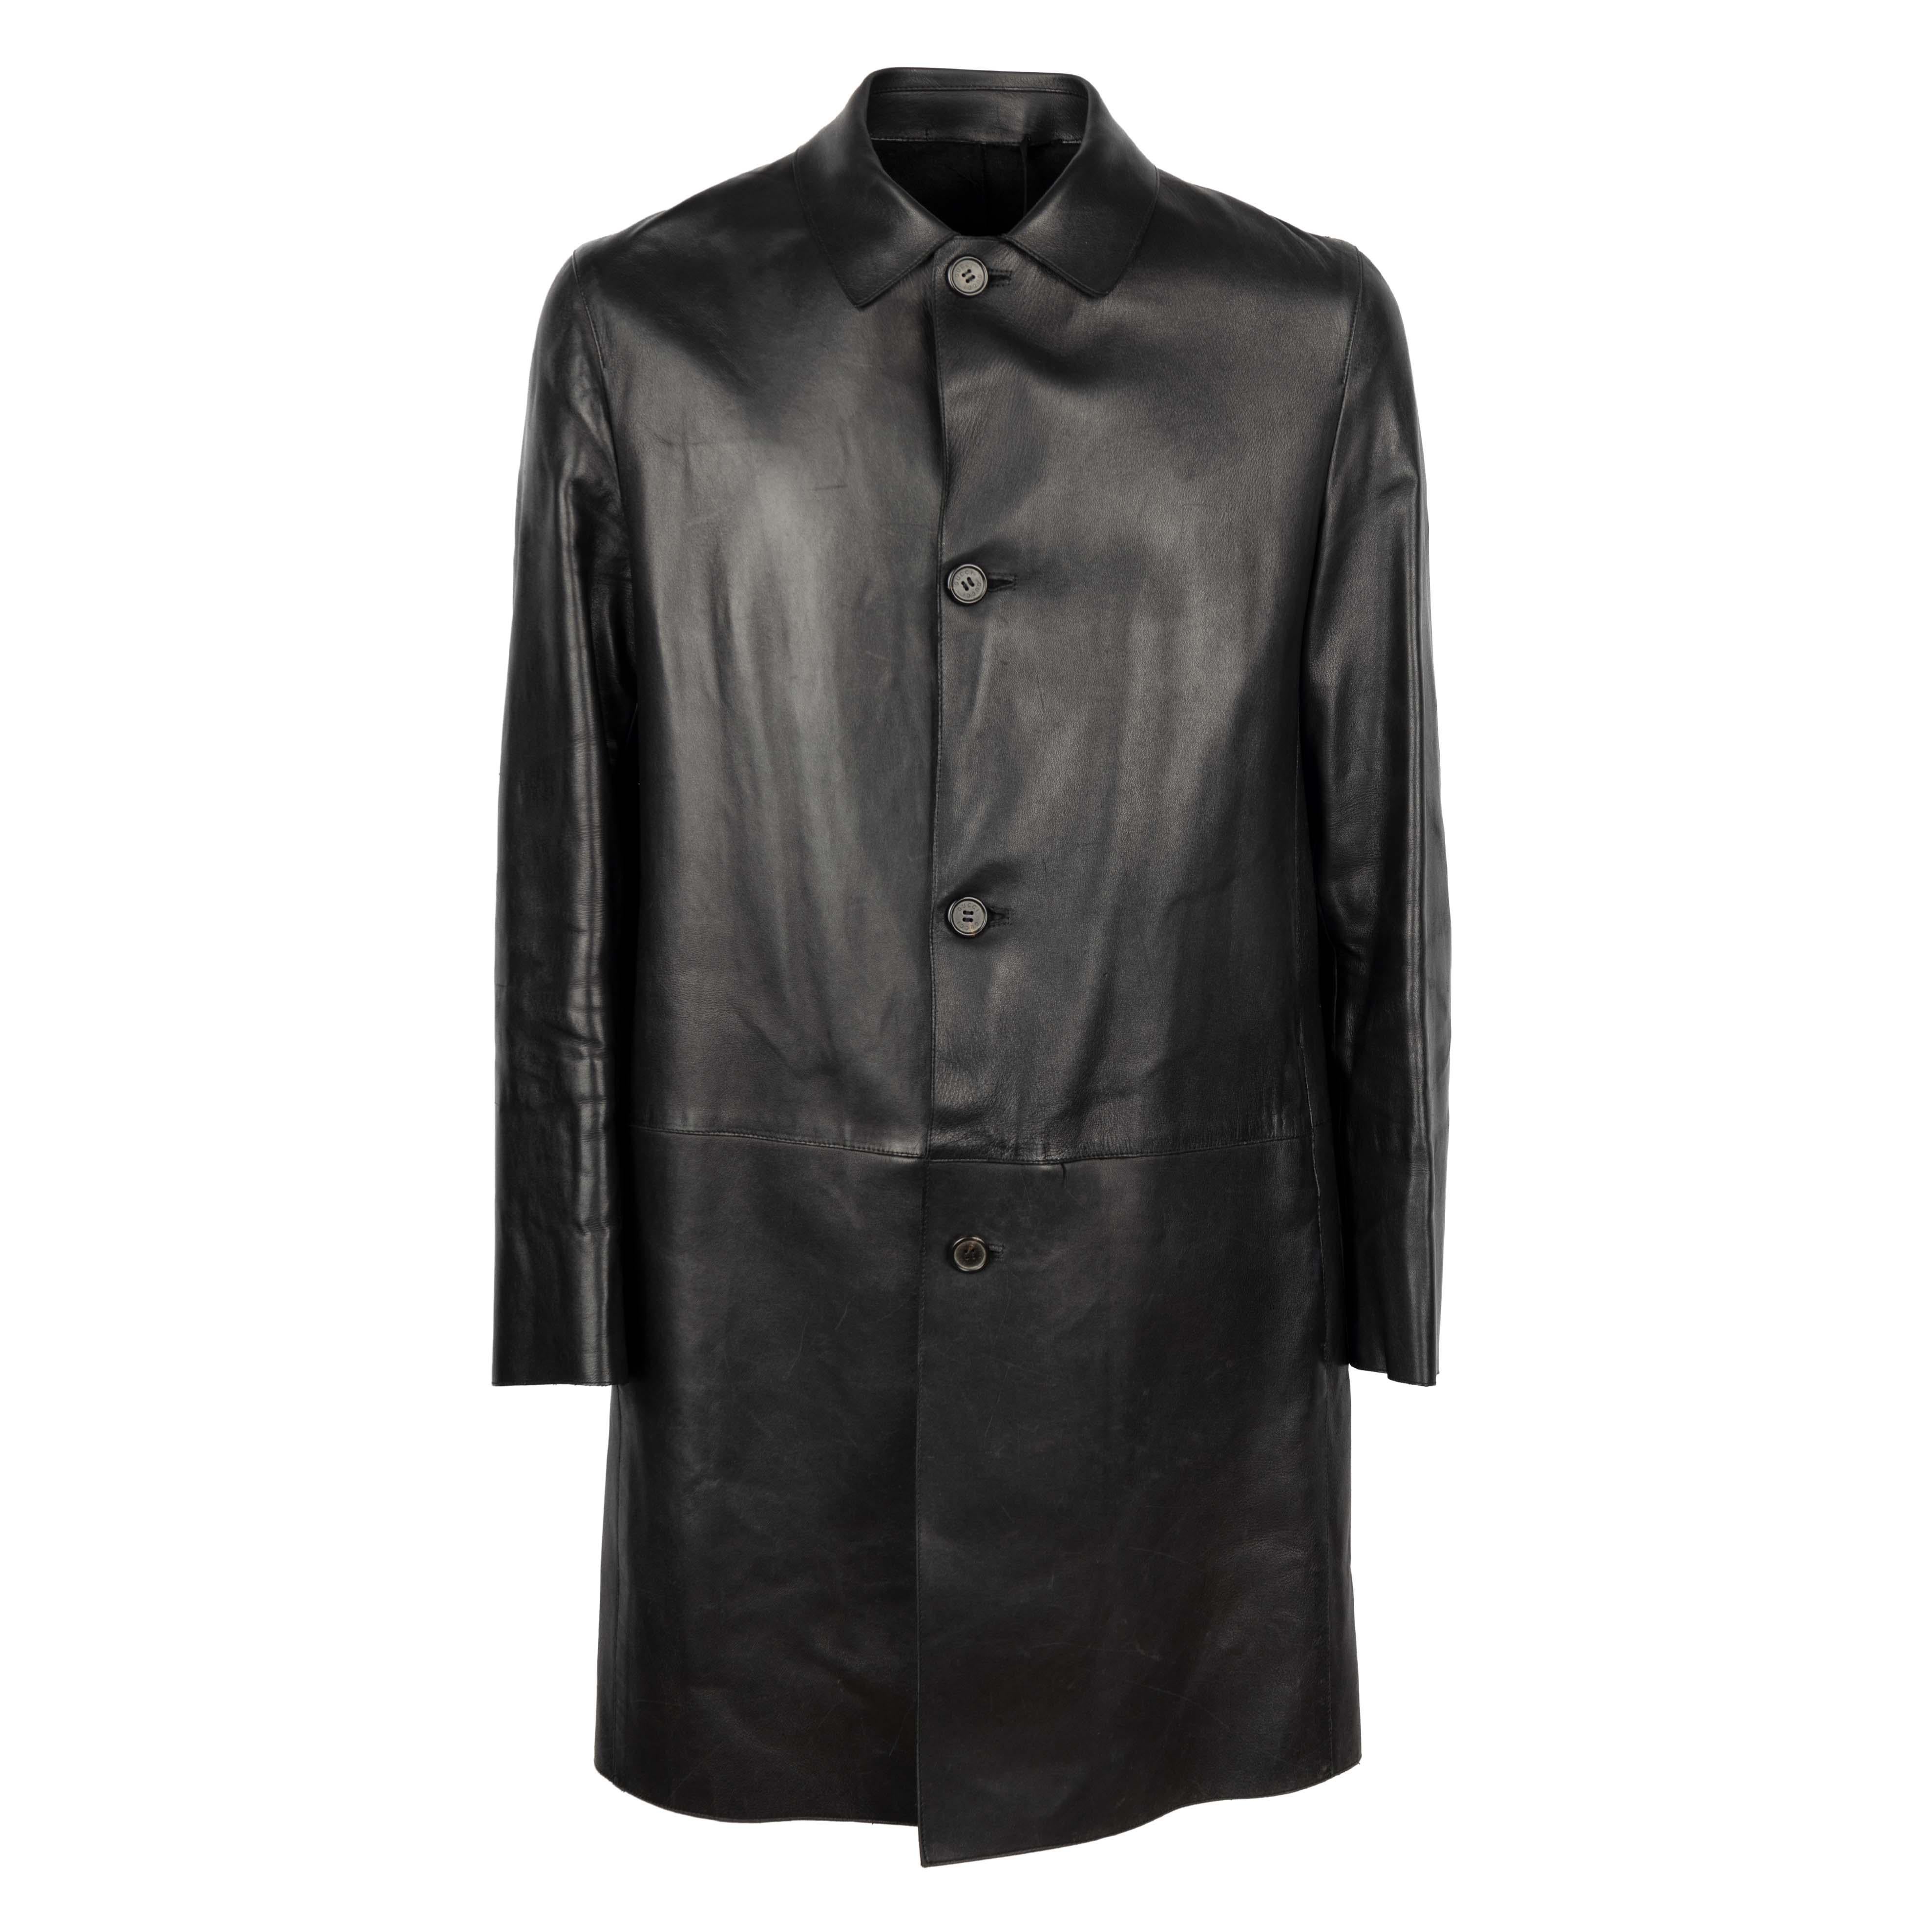 Gucci black leather trench coat from the iconic Tom Ford era in the early 2000s, known for revitalizing the brand with his eye-catching ready-to-wear designs. Wool and cashmere lining. Long sleeve button fastening.